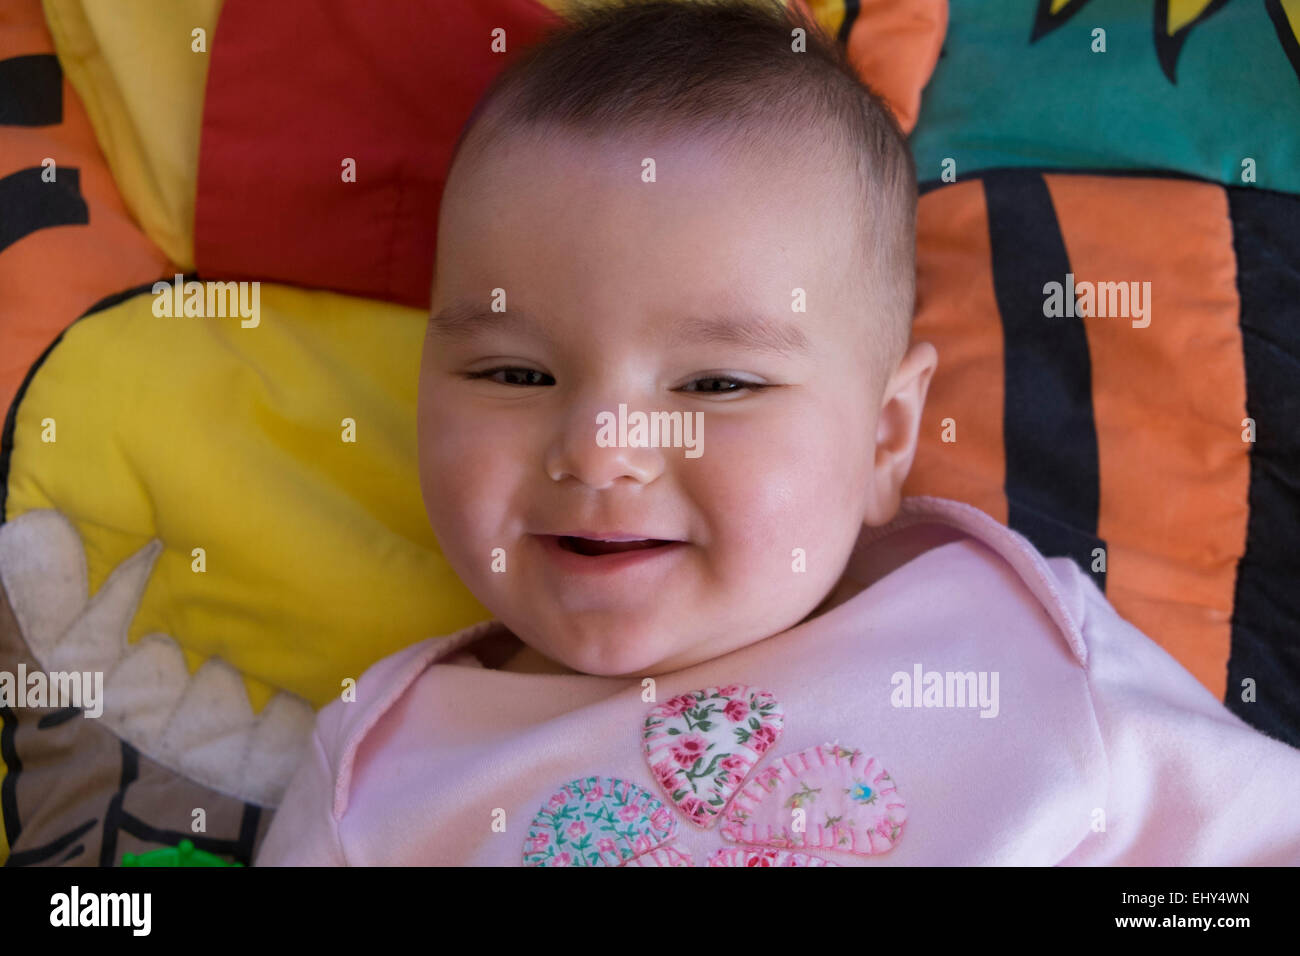 8 month old baby girl, lying on floor, smiling Stock Photo